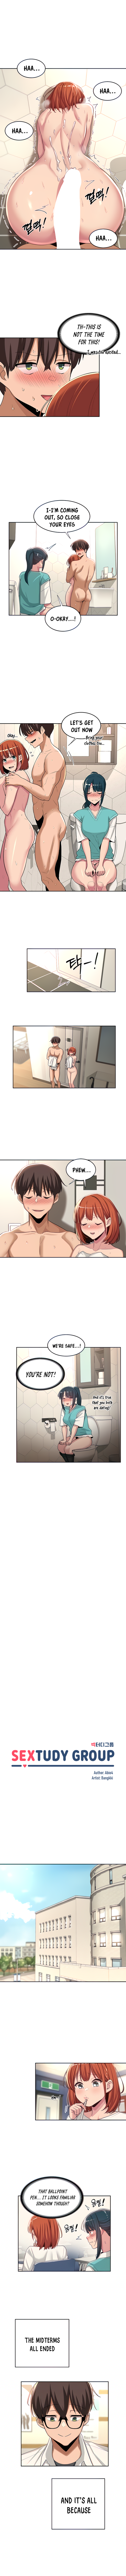 Panel Image 1 for chapter 47 of manhwa Sex Study Group on read.oppai.stream